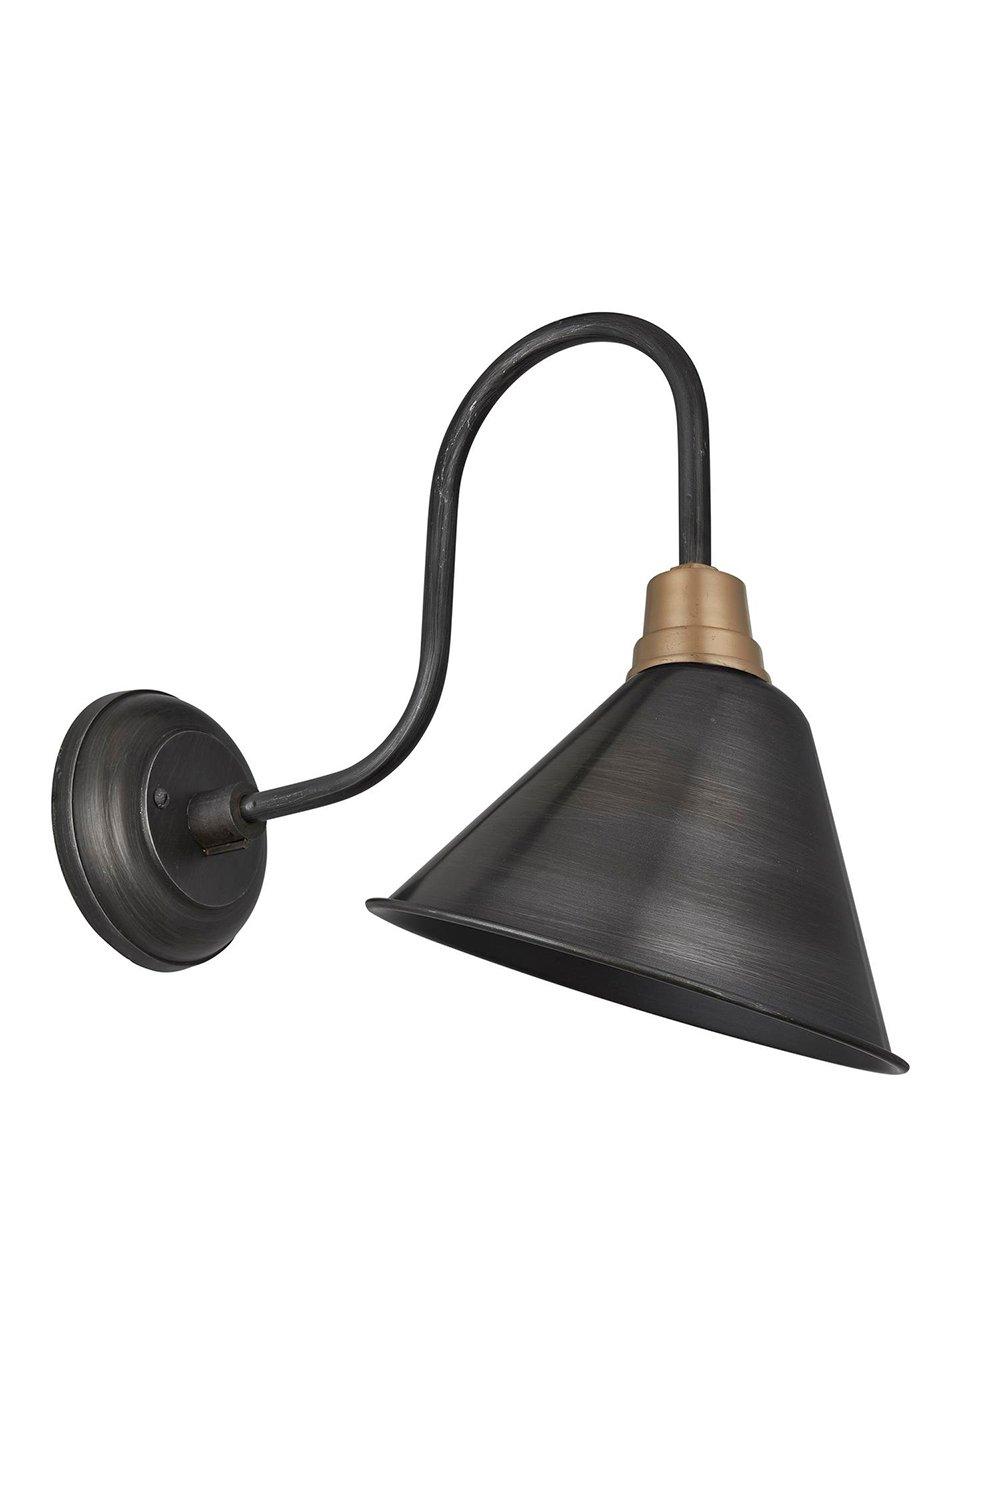 Swan Neck Cone Wall Light, 8 Inch, Pewter